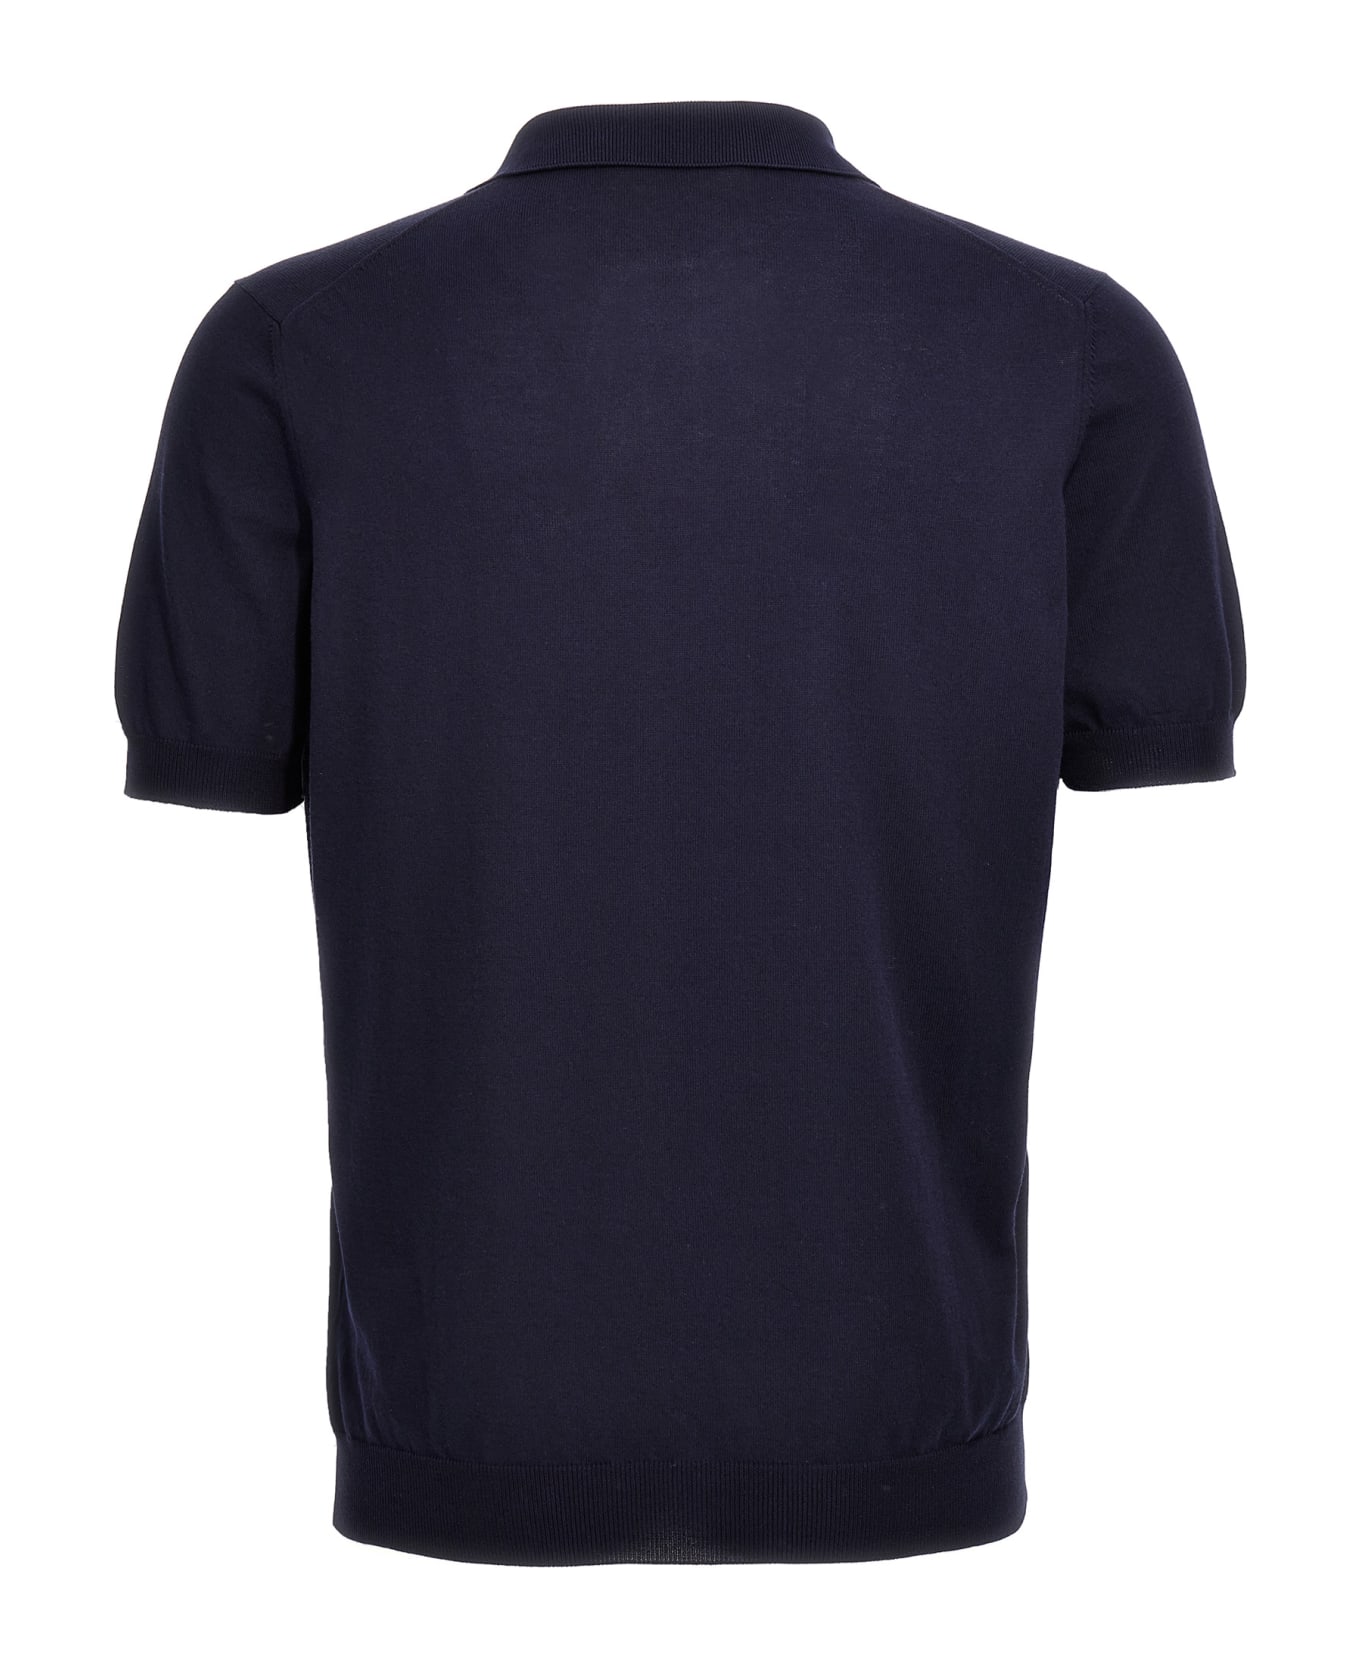 Tagliatore Knitted Polo Shirt - Blue ポロシャツ